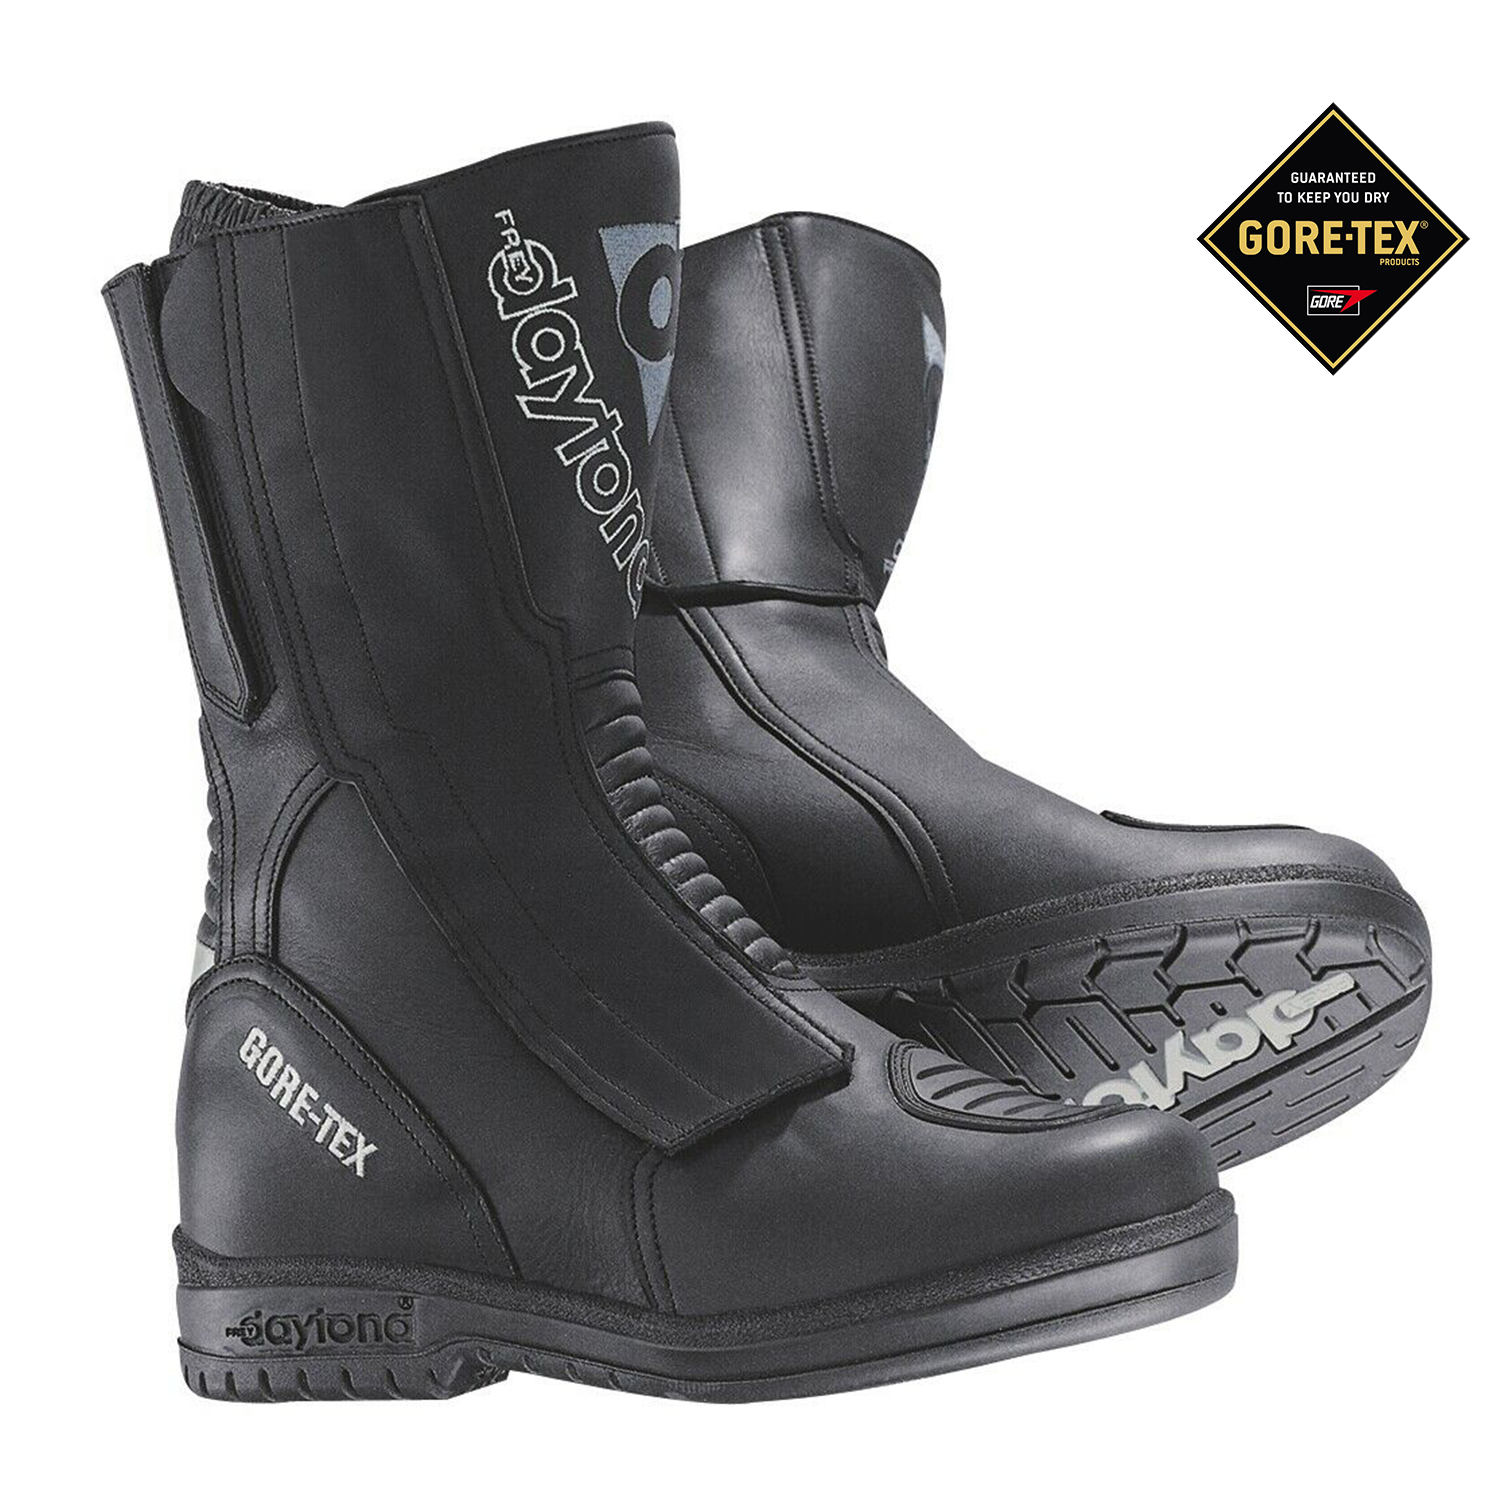 Daytona M-Star GTX Touring Boots - Available in Various Sizes